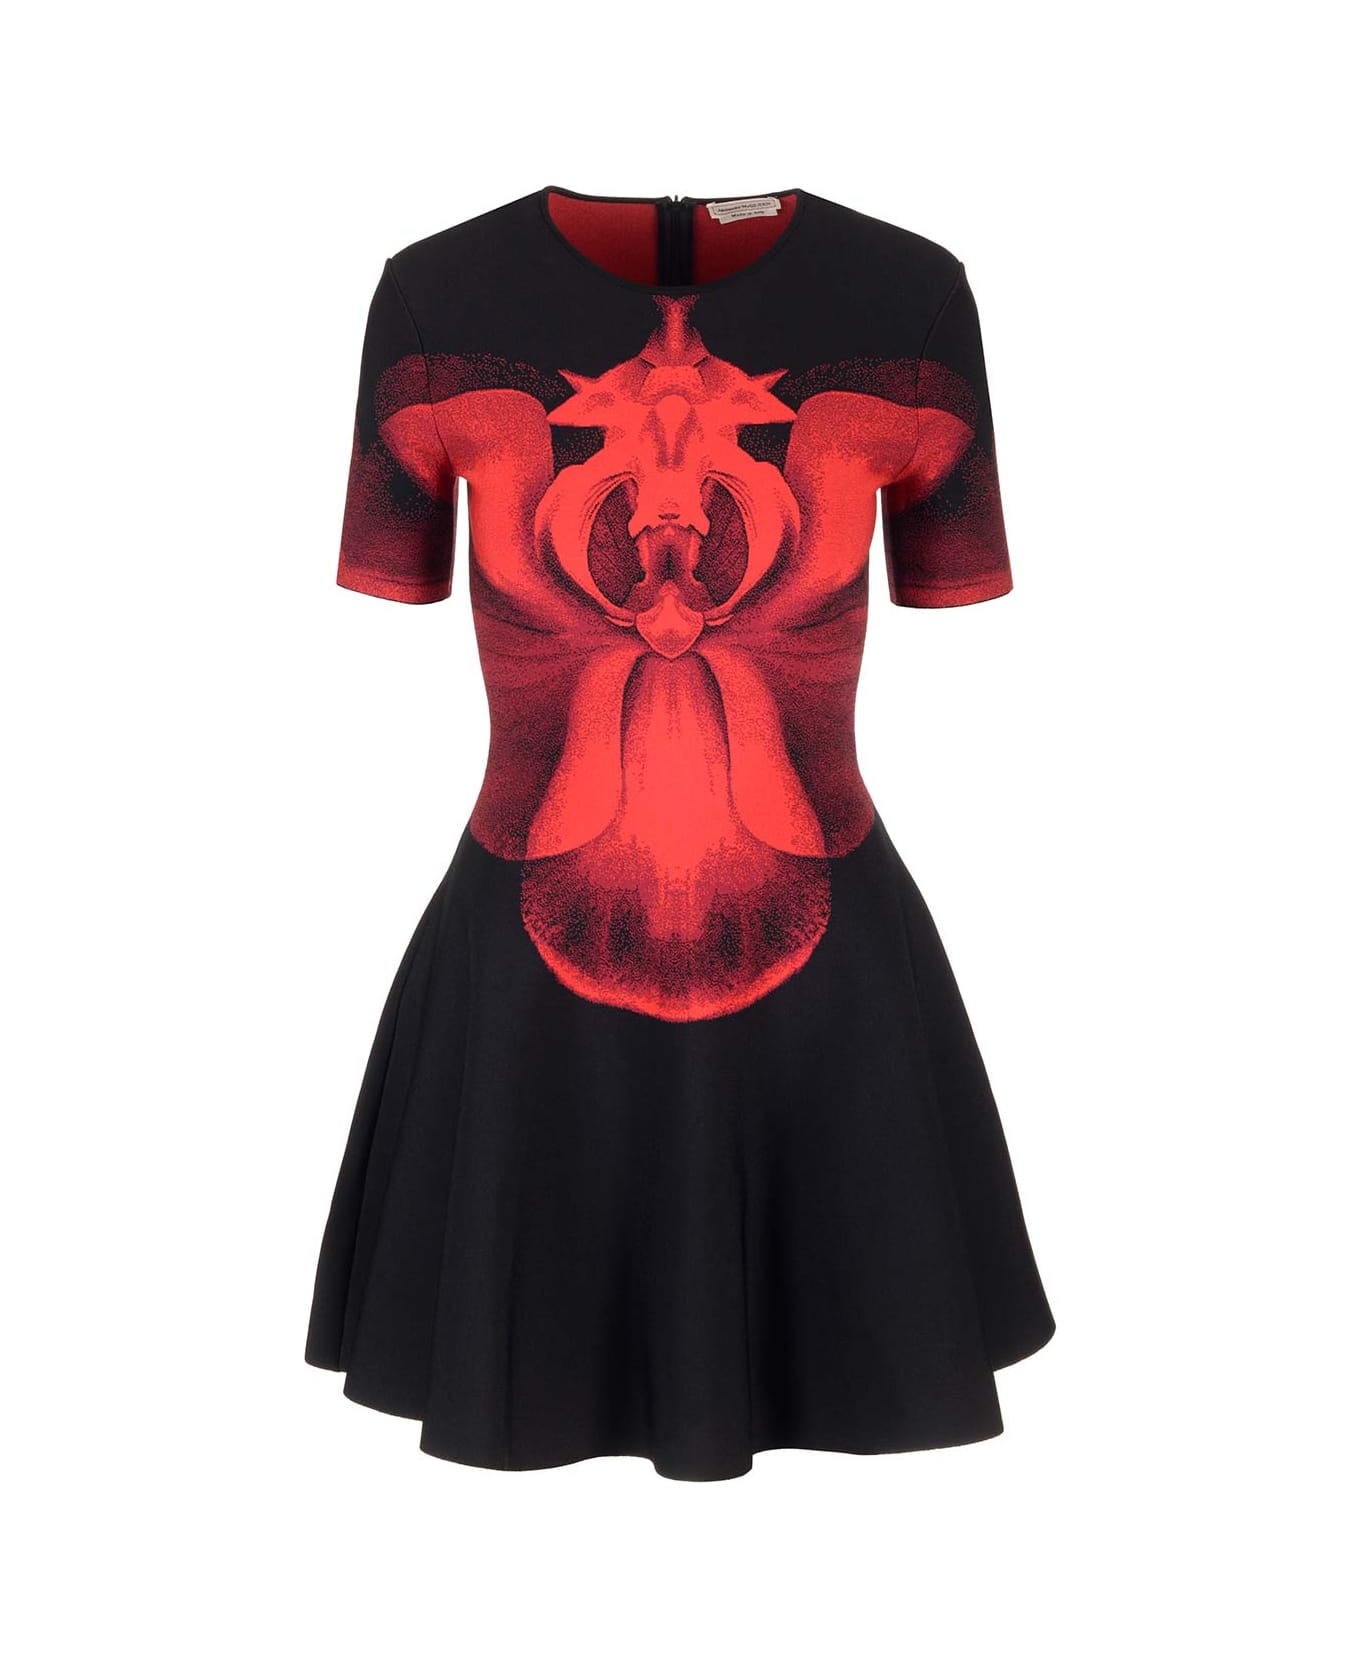 Alexander McQueen 'ethereal Orchid' Minidress - Black Red